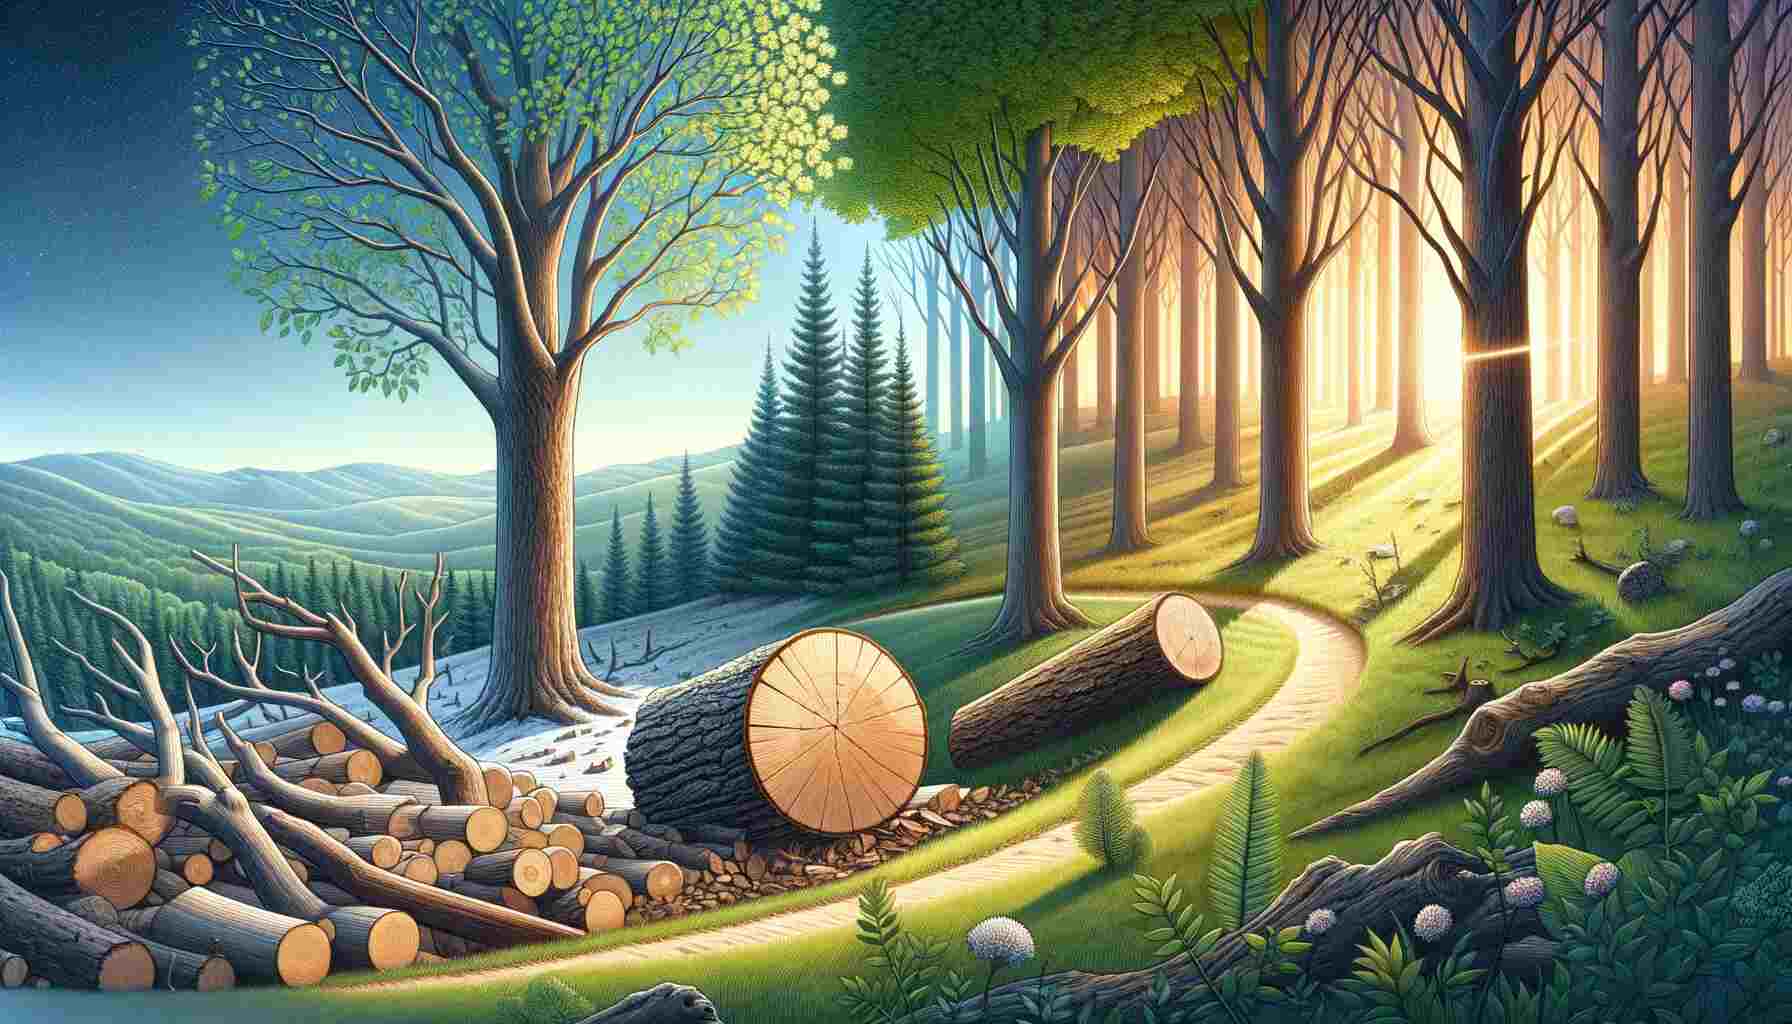 Here is the featured image for the article Understanding Wilting Firewood: A Comprehensive Guide.An illustration depicting the process of wilting firewood in a forest setting. In the foreground, a freshly cut tree with intact leaves lies on the ground, symbolizing the onset of wilting. The background transitions from early spring to late summer, showcasing diverse tree species in a peaceful forest landscape. Sunlight filters through the canopy, highlighting the role of natural elements in drying the wood.